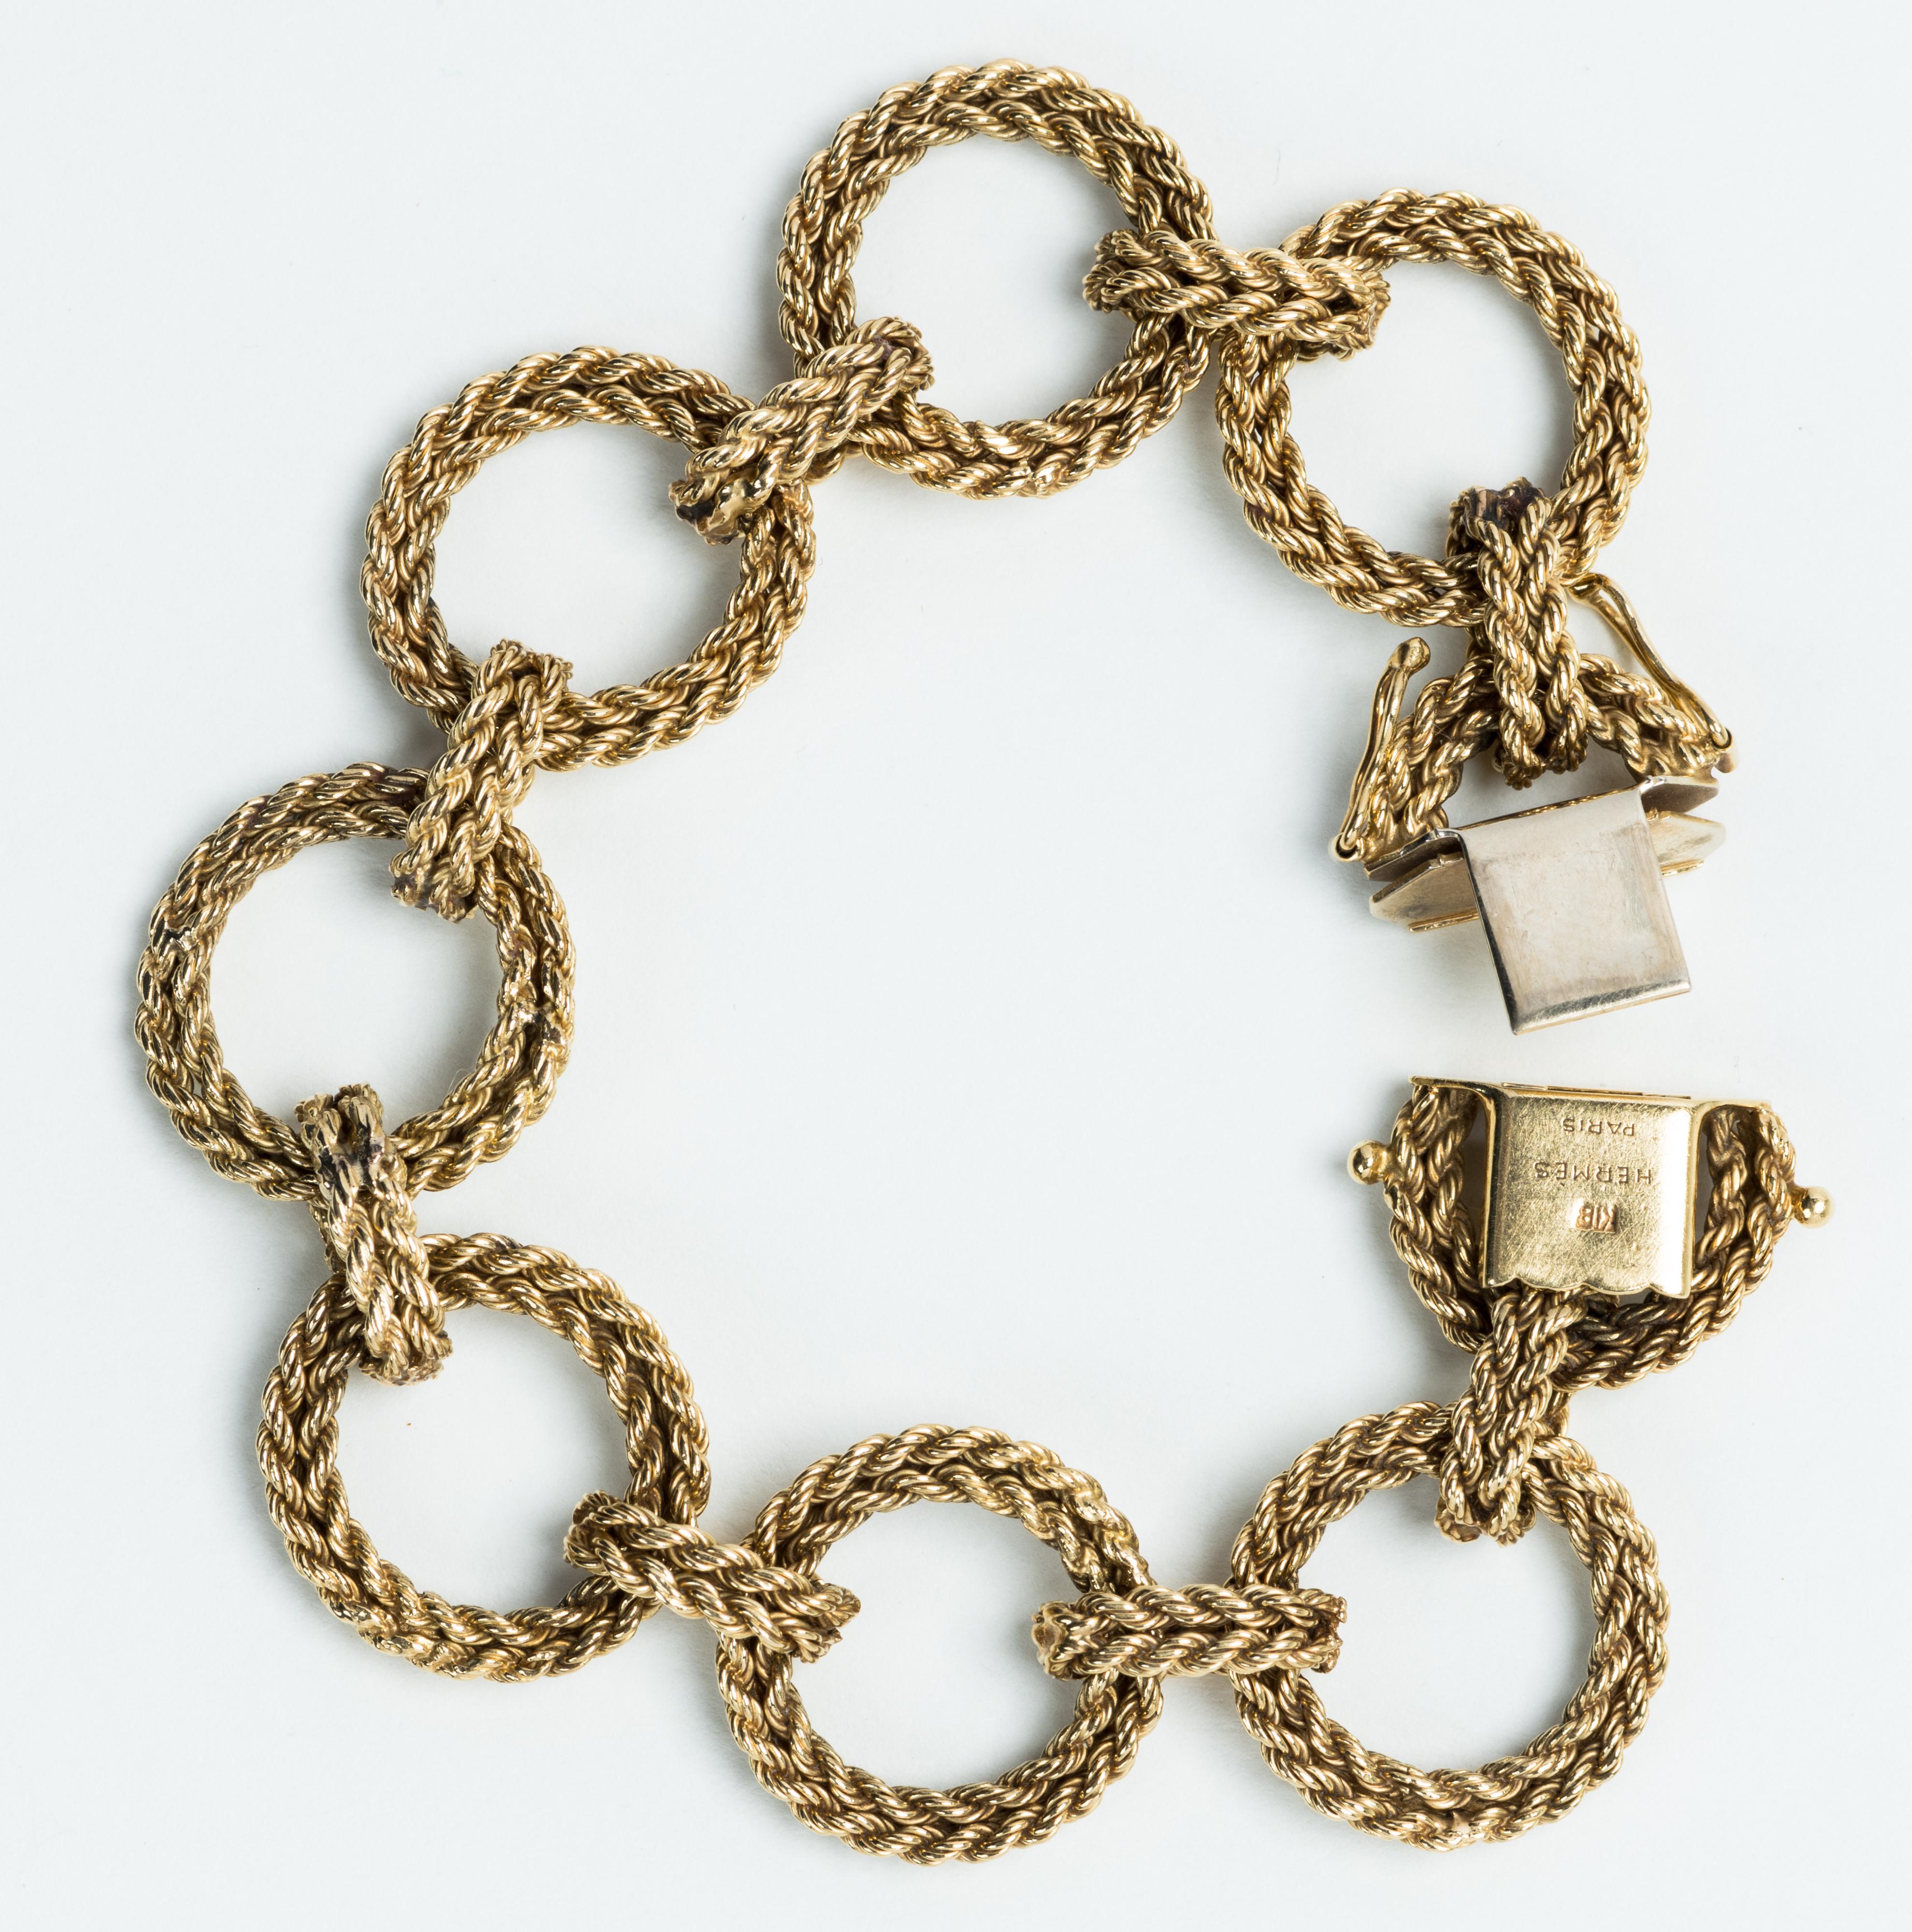 Signed Hermes 18 karat gold circular rope linked bracelet with two safety clasps, stamped Hermes Paris 18K, Circa 1960.

Size: L:  7”  W: 3/4”
Weight:  38.3 grams